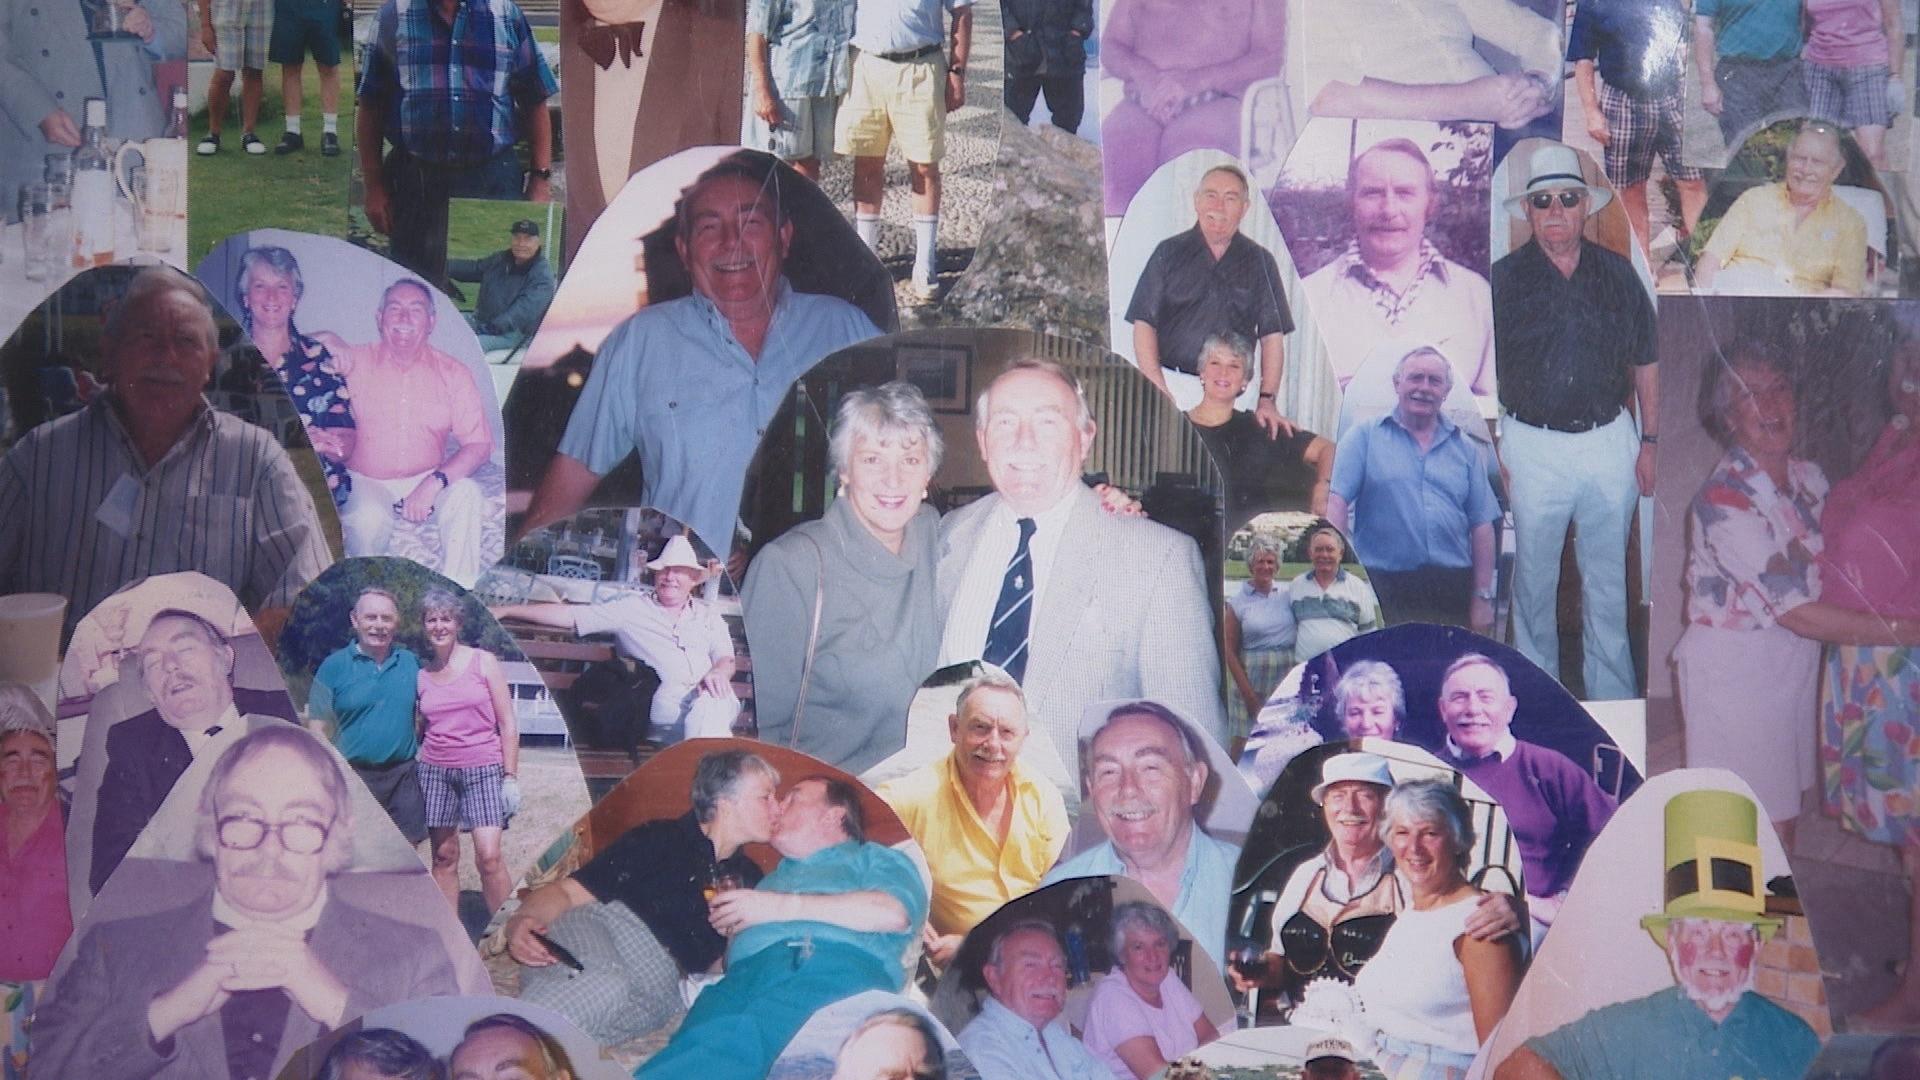 A collage full of memories of Walter.